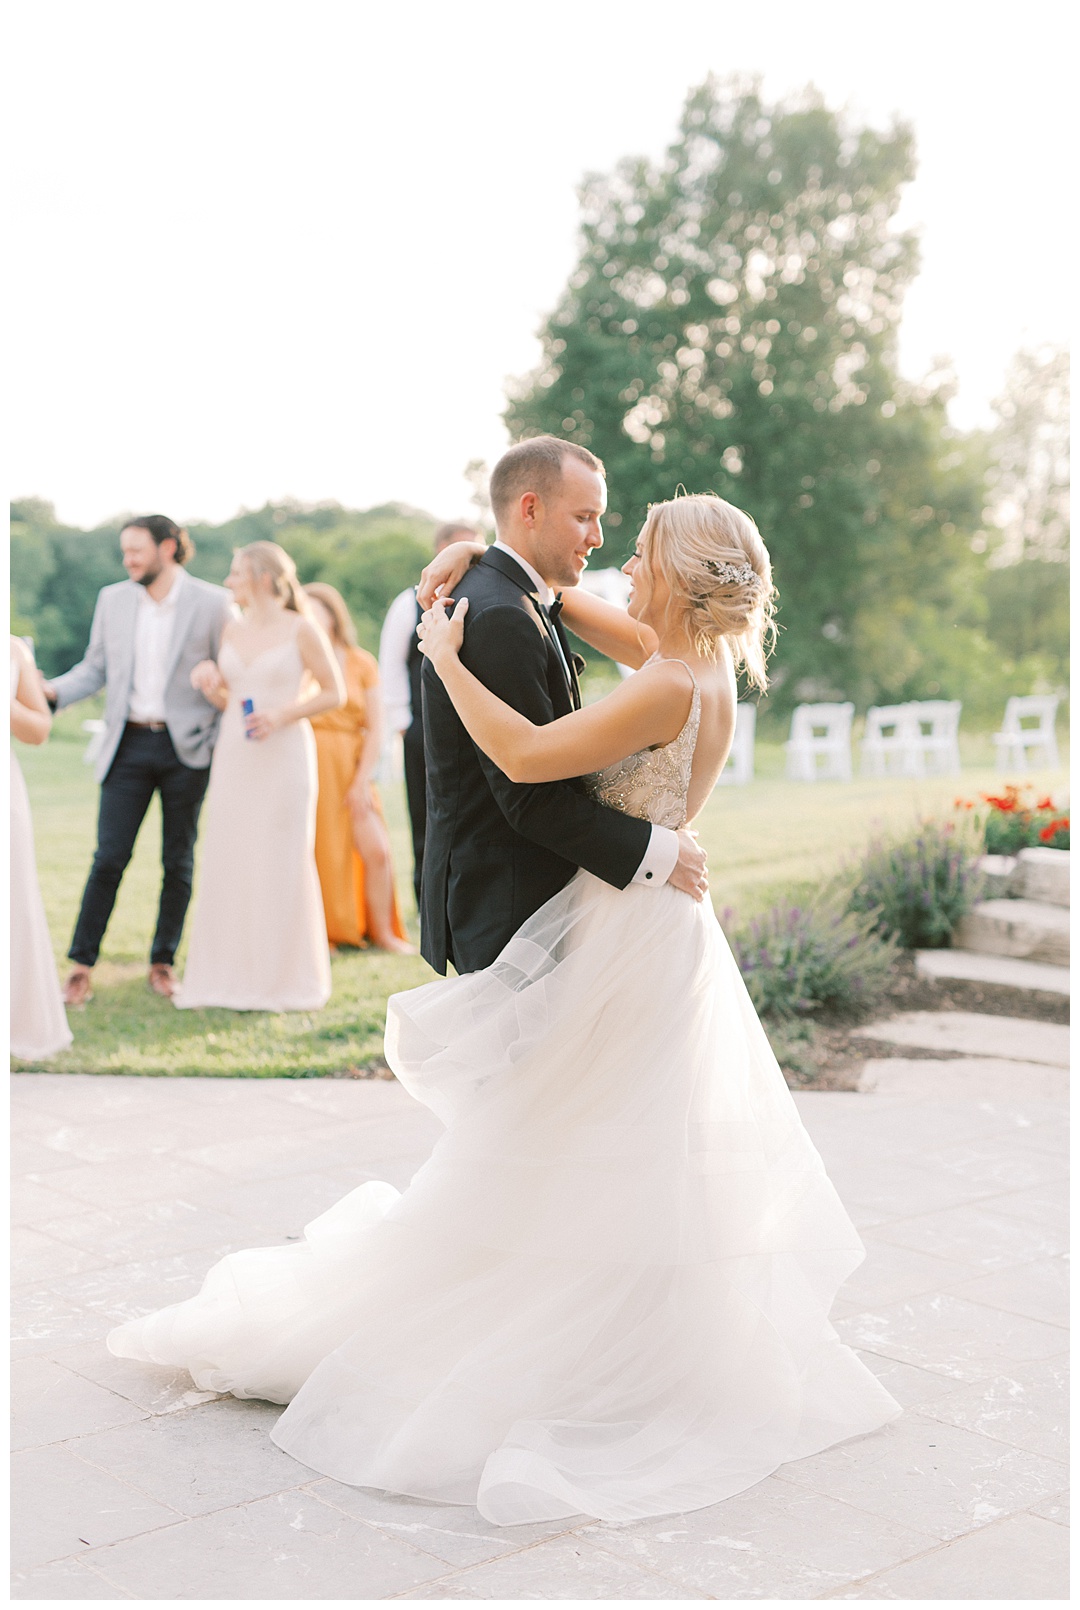 First Dance Lush Backyard Wedding on Film Featured on Magnolia Rouge with Sarah Sunstrom Photography